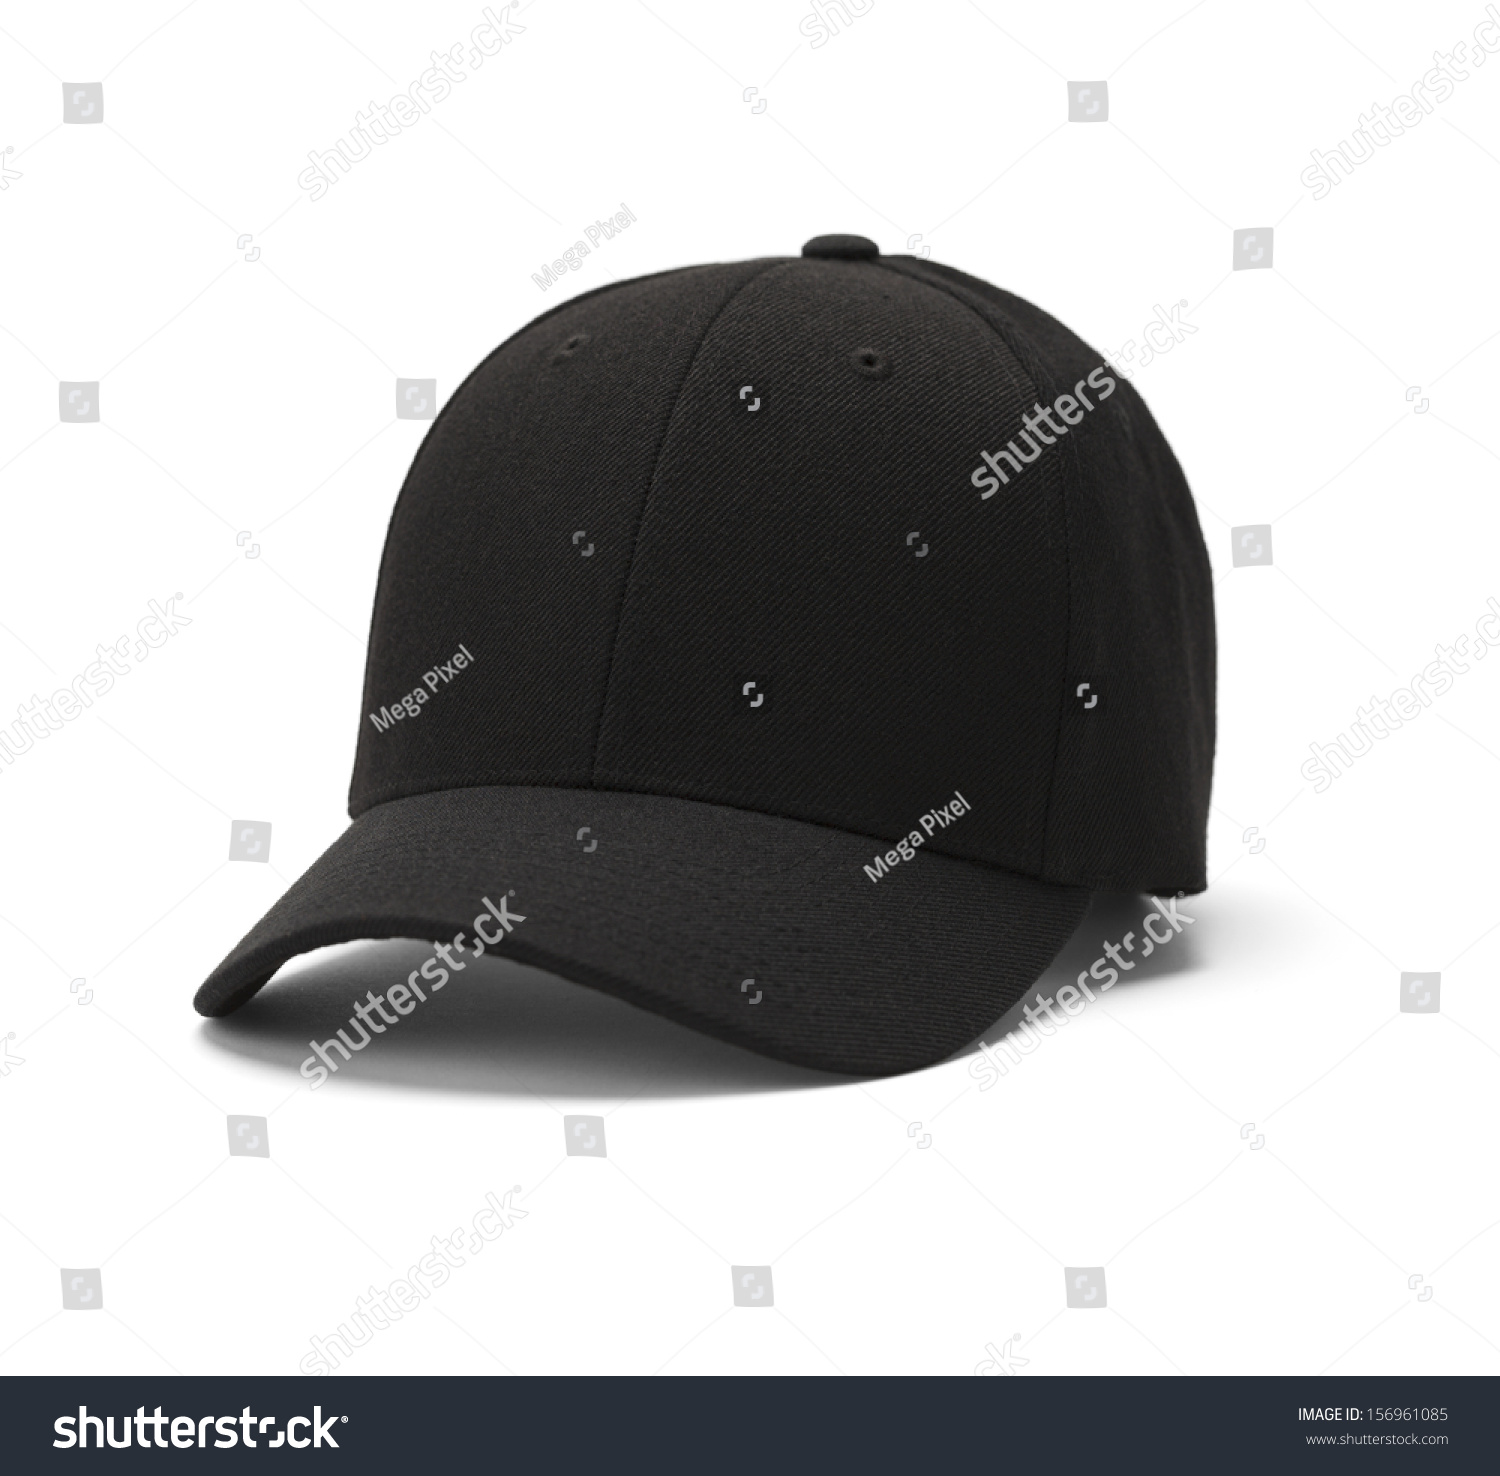 Baseball hat Isolated on a white background. #156961085